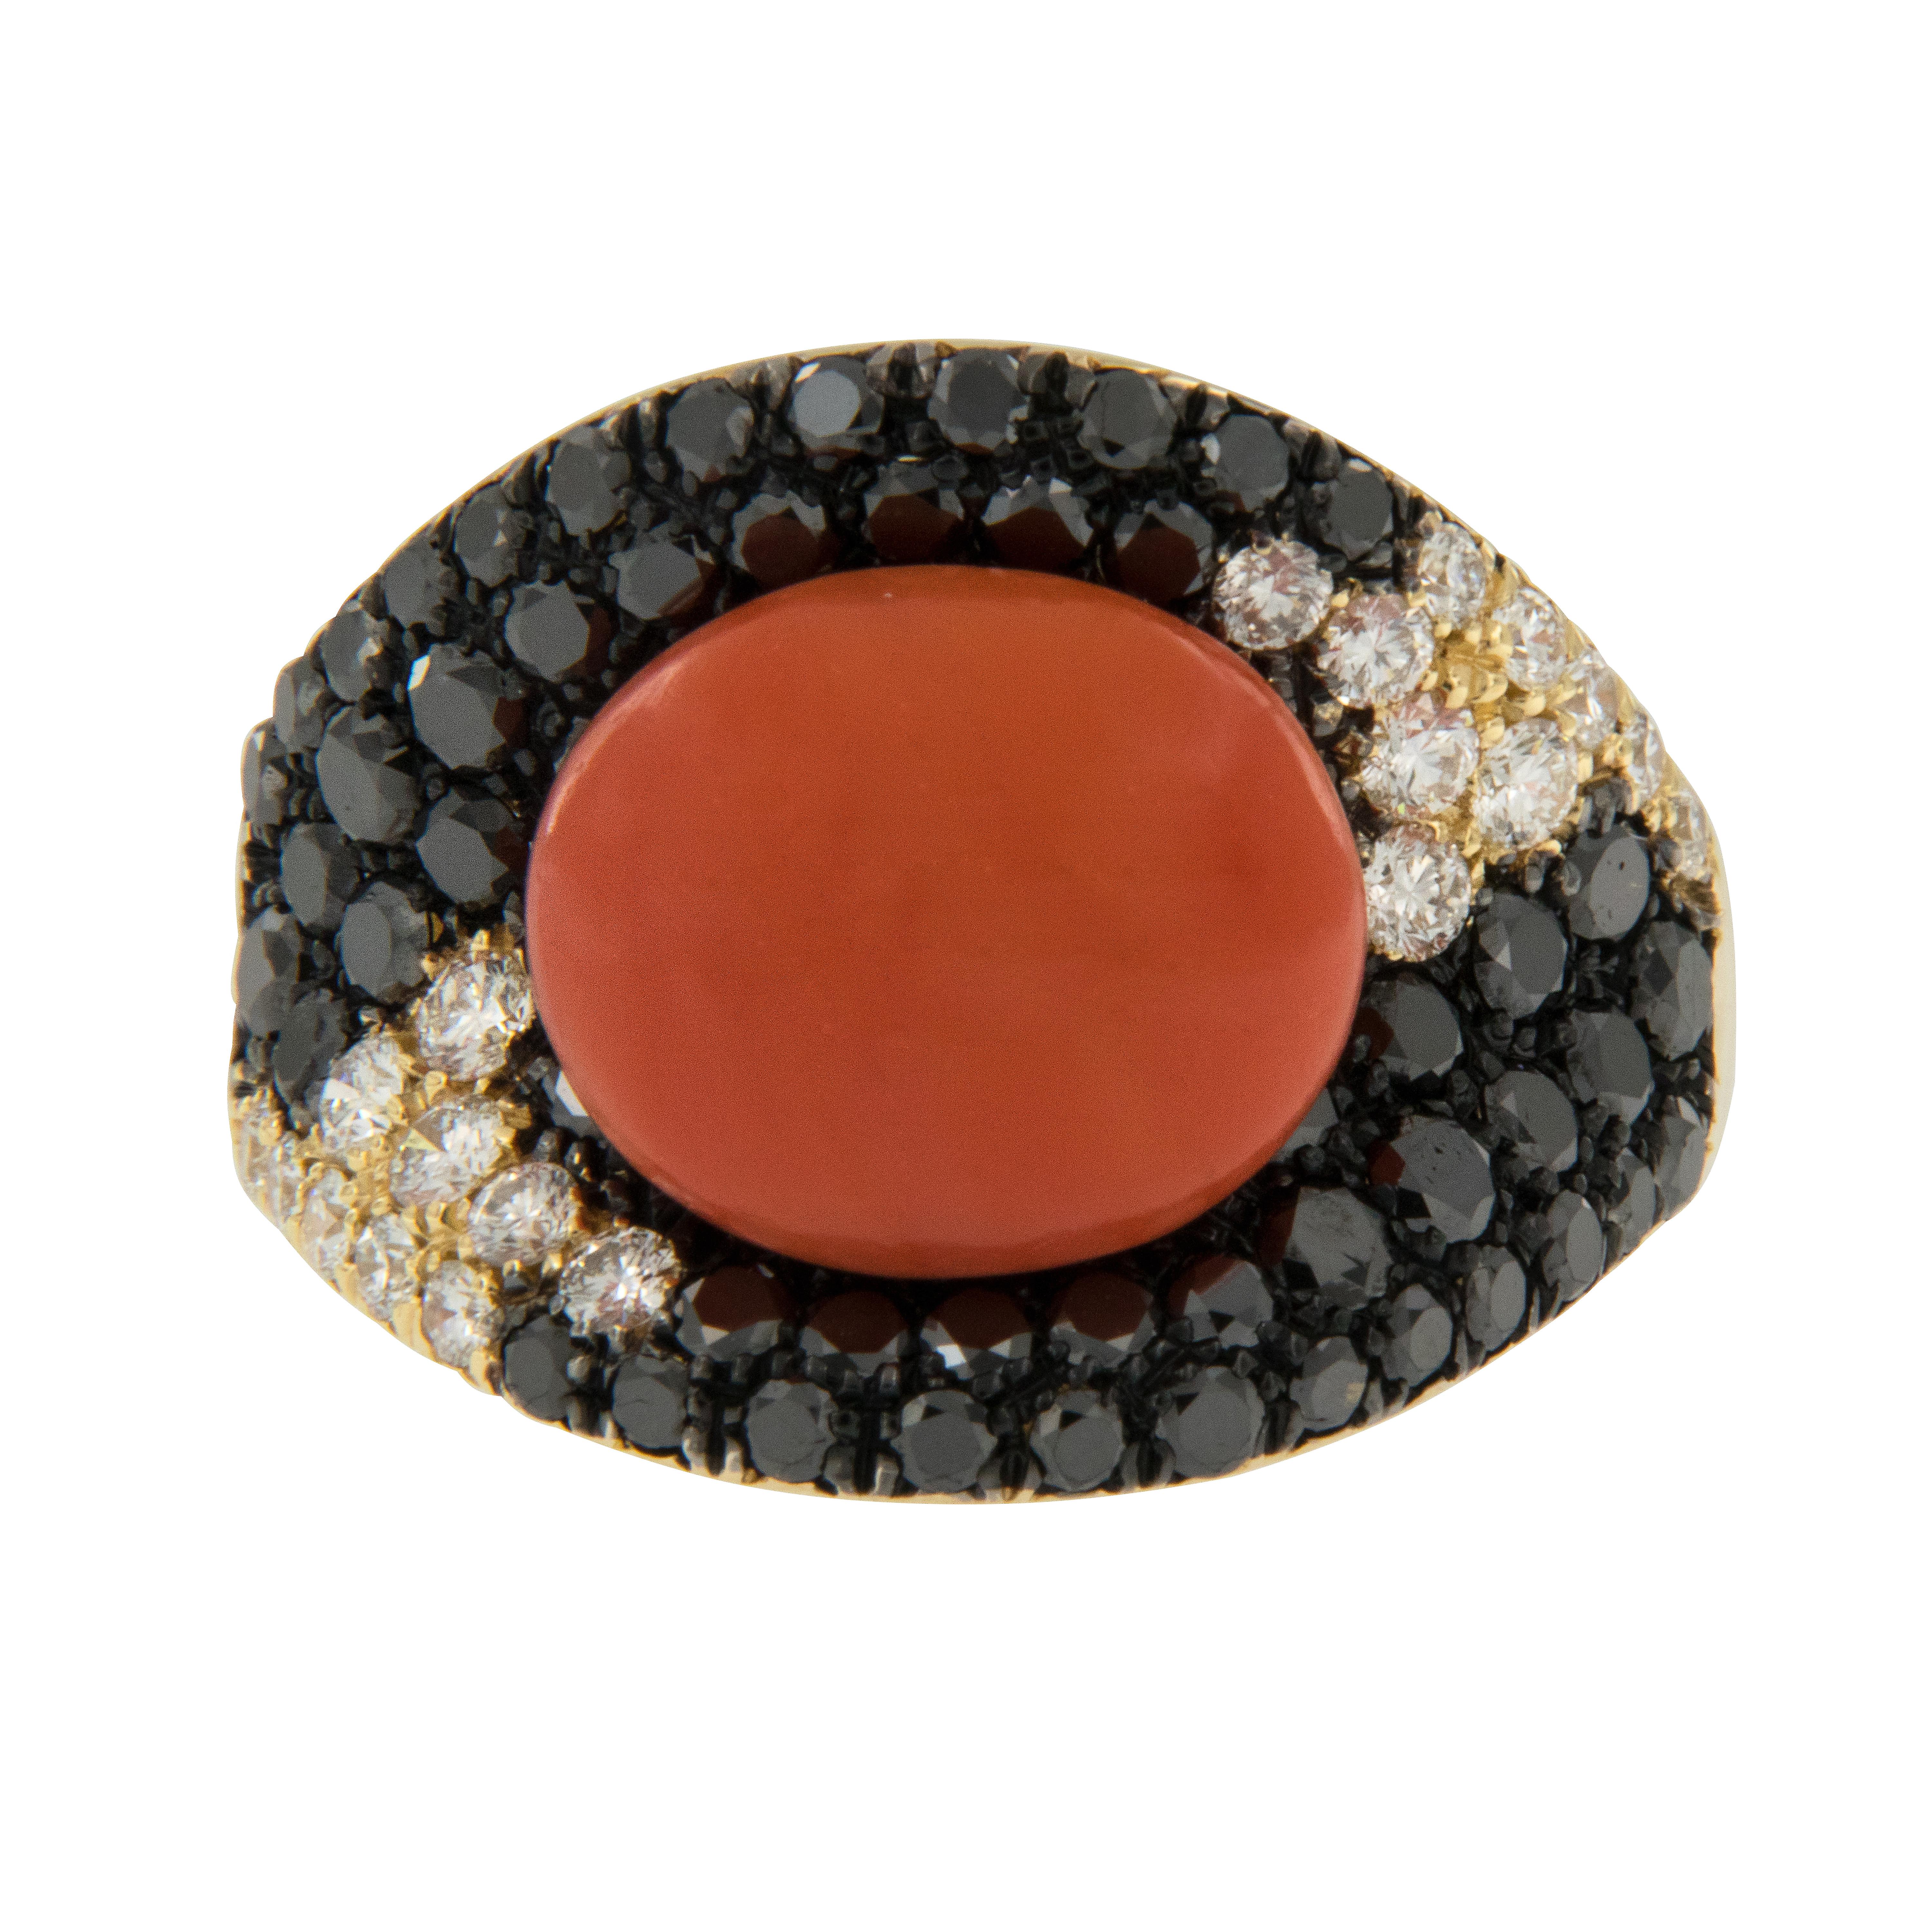 Designed just for pure PLEASURE and incredibly CHARMING! ANCORA is a dynamic reality, proud of its long experience in the field of jewellery creation. Absolutely stunning 18 karat yellow gold concave ring with fine Mediterranean oval cabochon coral